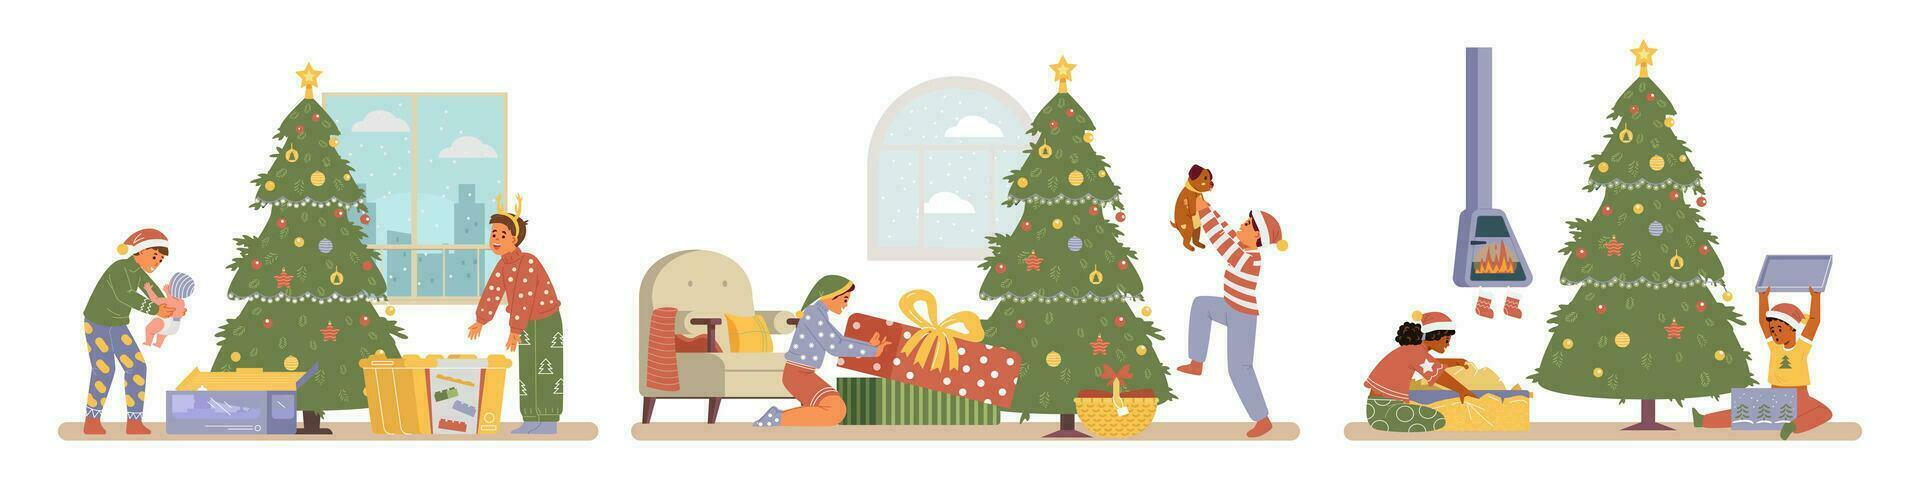 Happy kids opening gifts near Christmas tree flat vector scenes set. Excited multiracial children in Christmas outfit unwrapping presents at home.